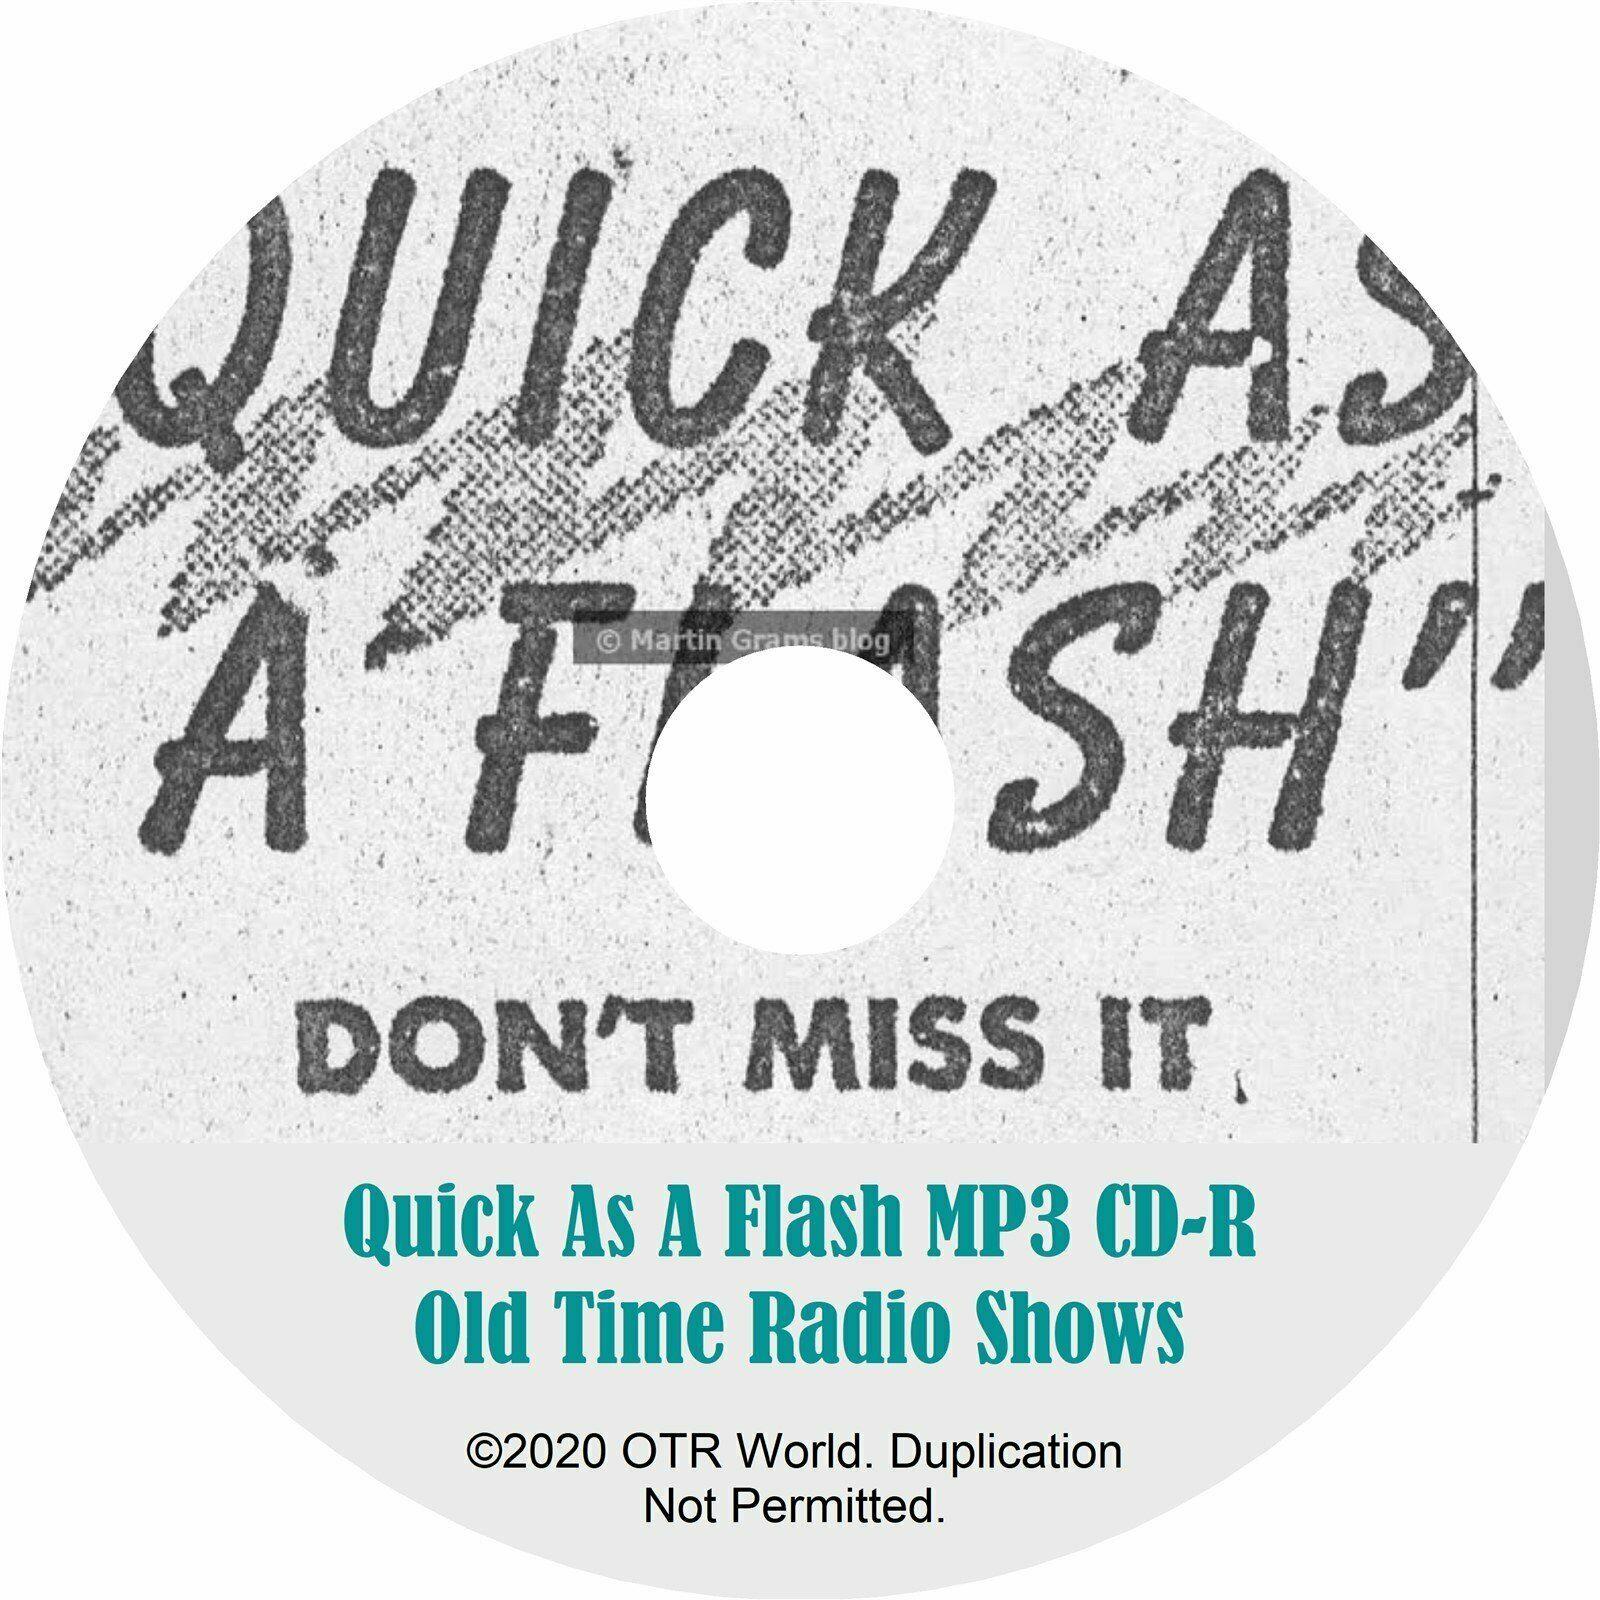 Quick As A Flash OTR Old Time Radio Shows MP3 On CD 3 Episodes